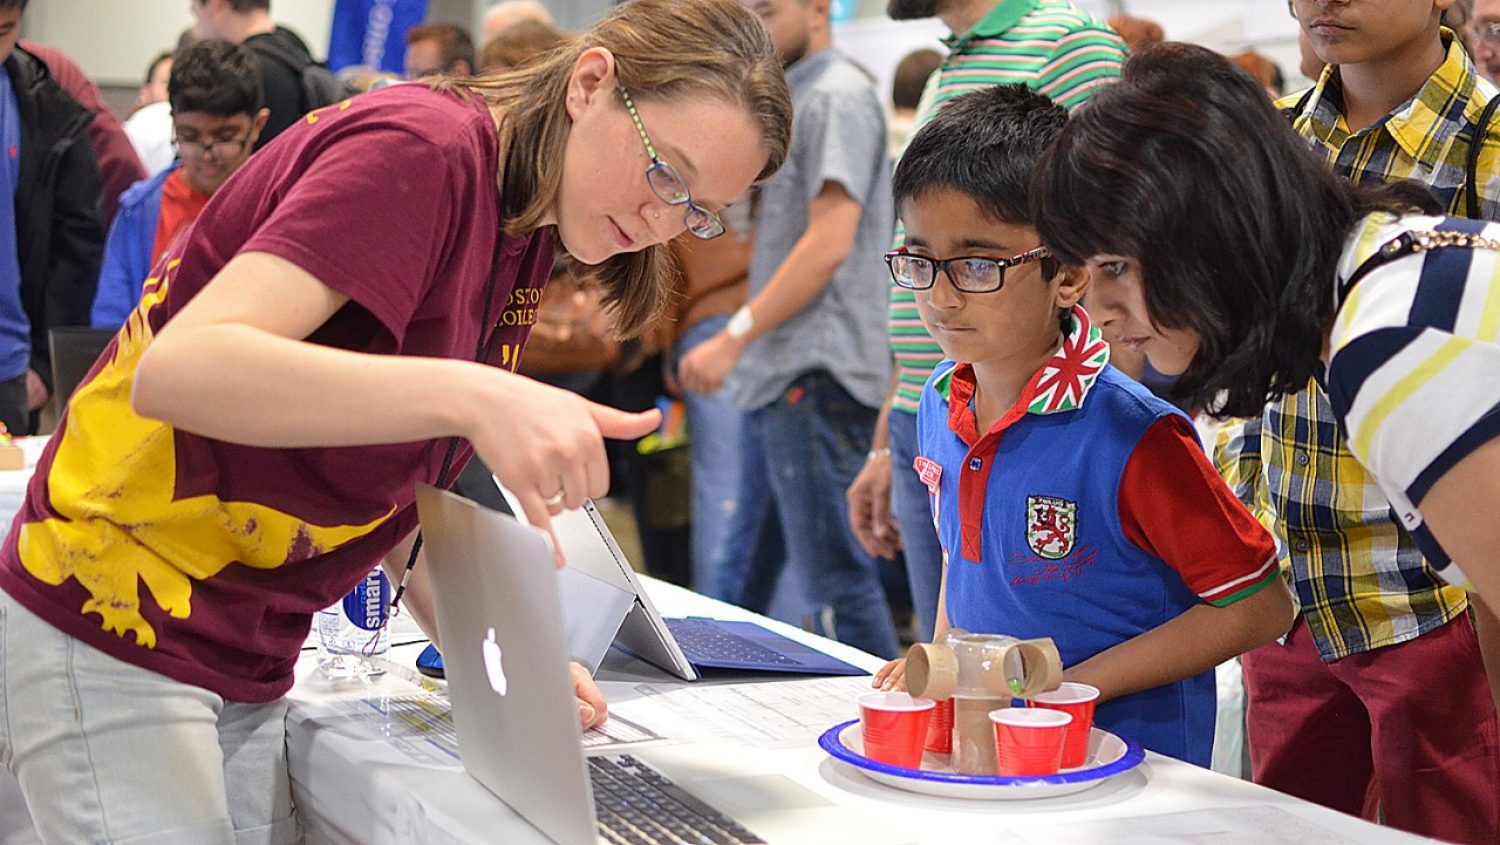 Students at USA Science & Engineering Festival